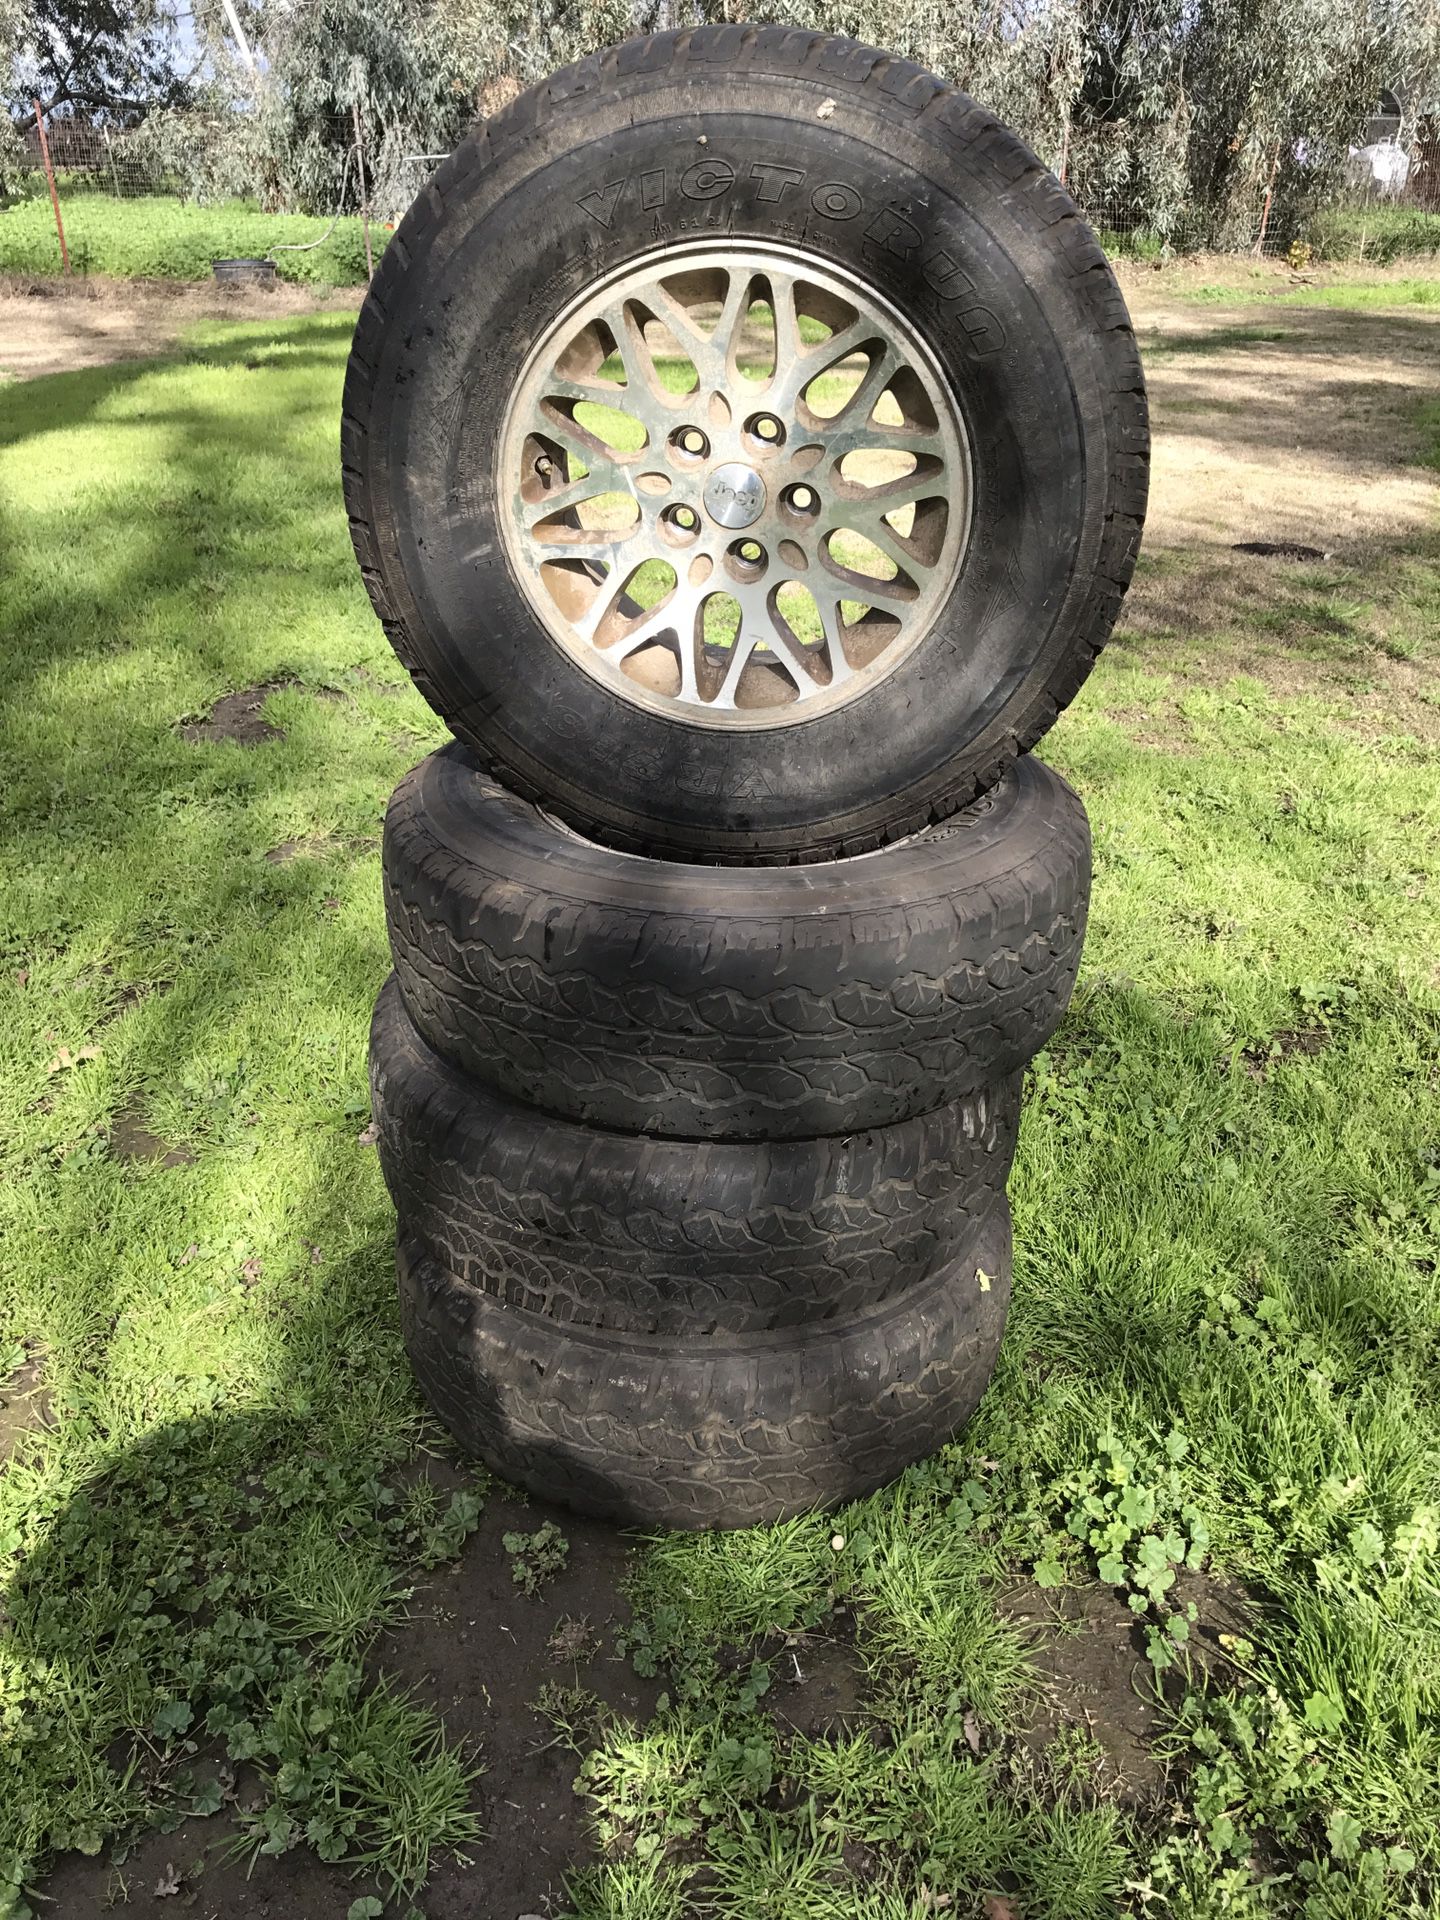 95 Jeep Grand Cherokee Rims and Tires $175